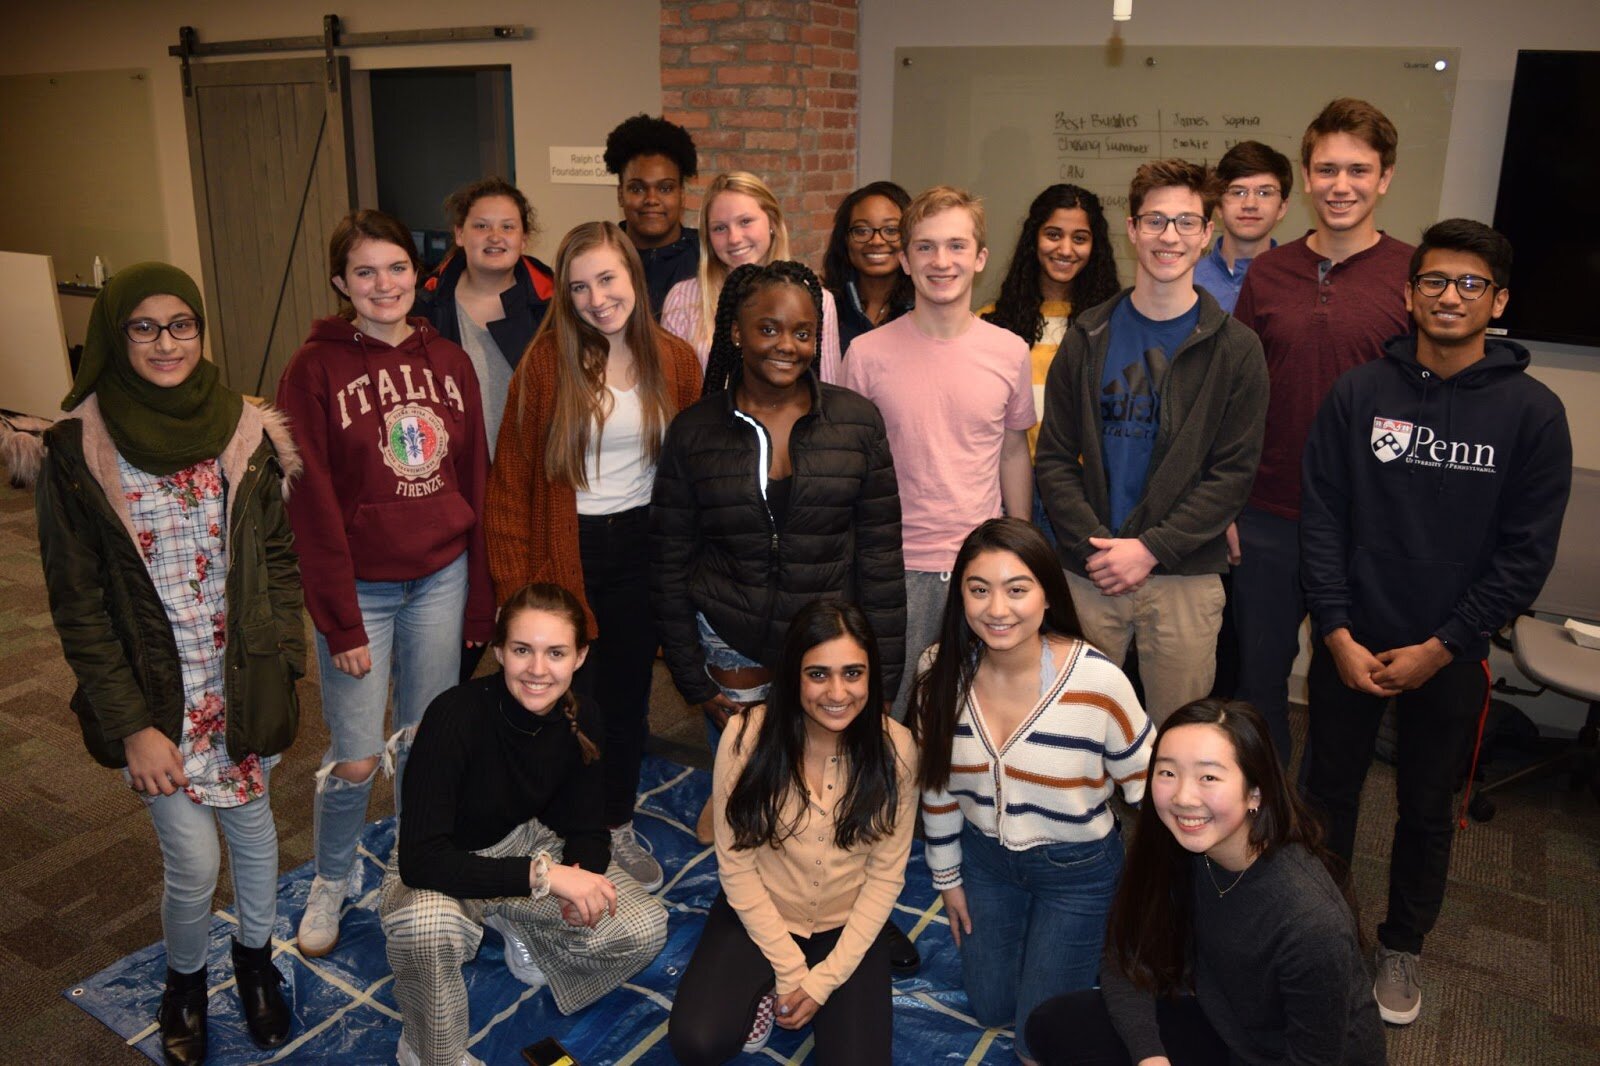 Members of the Ann Arbor Area Community Foundation Youth Council.